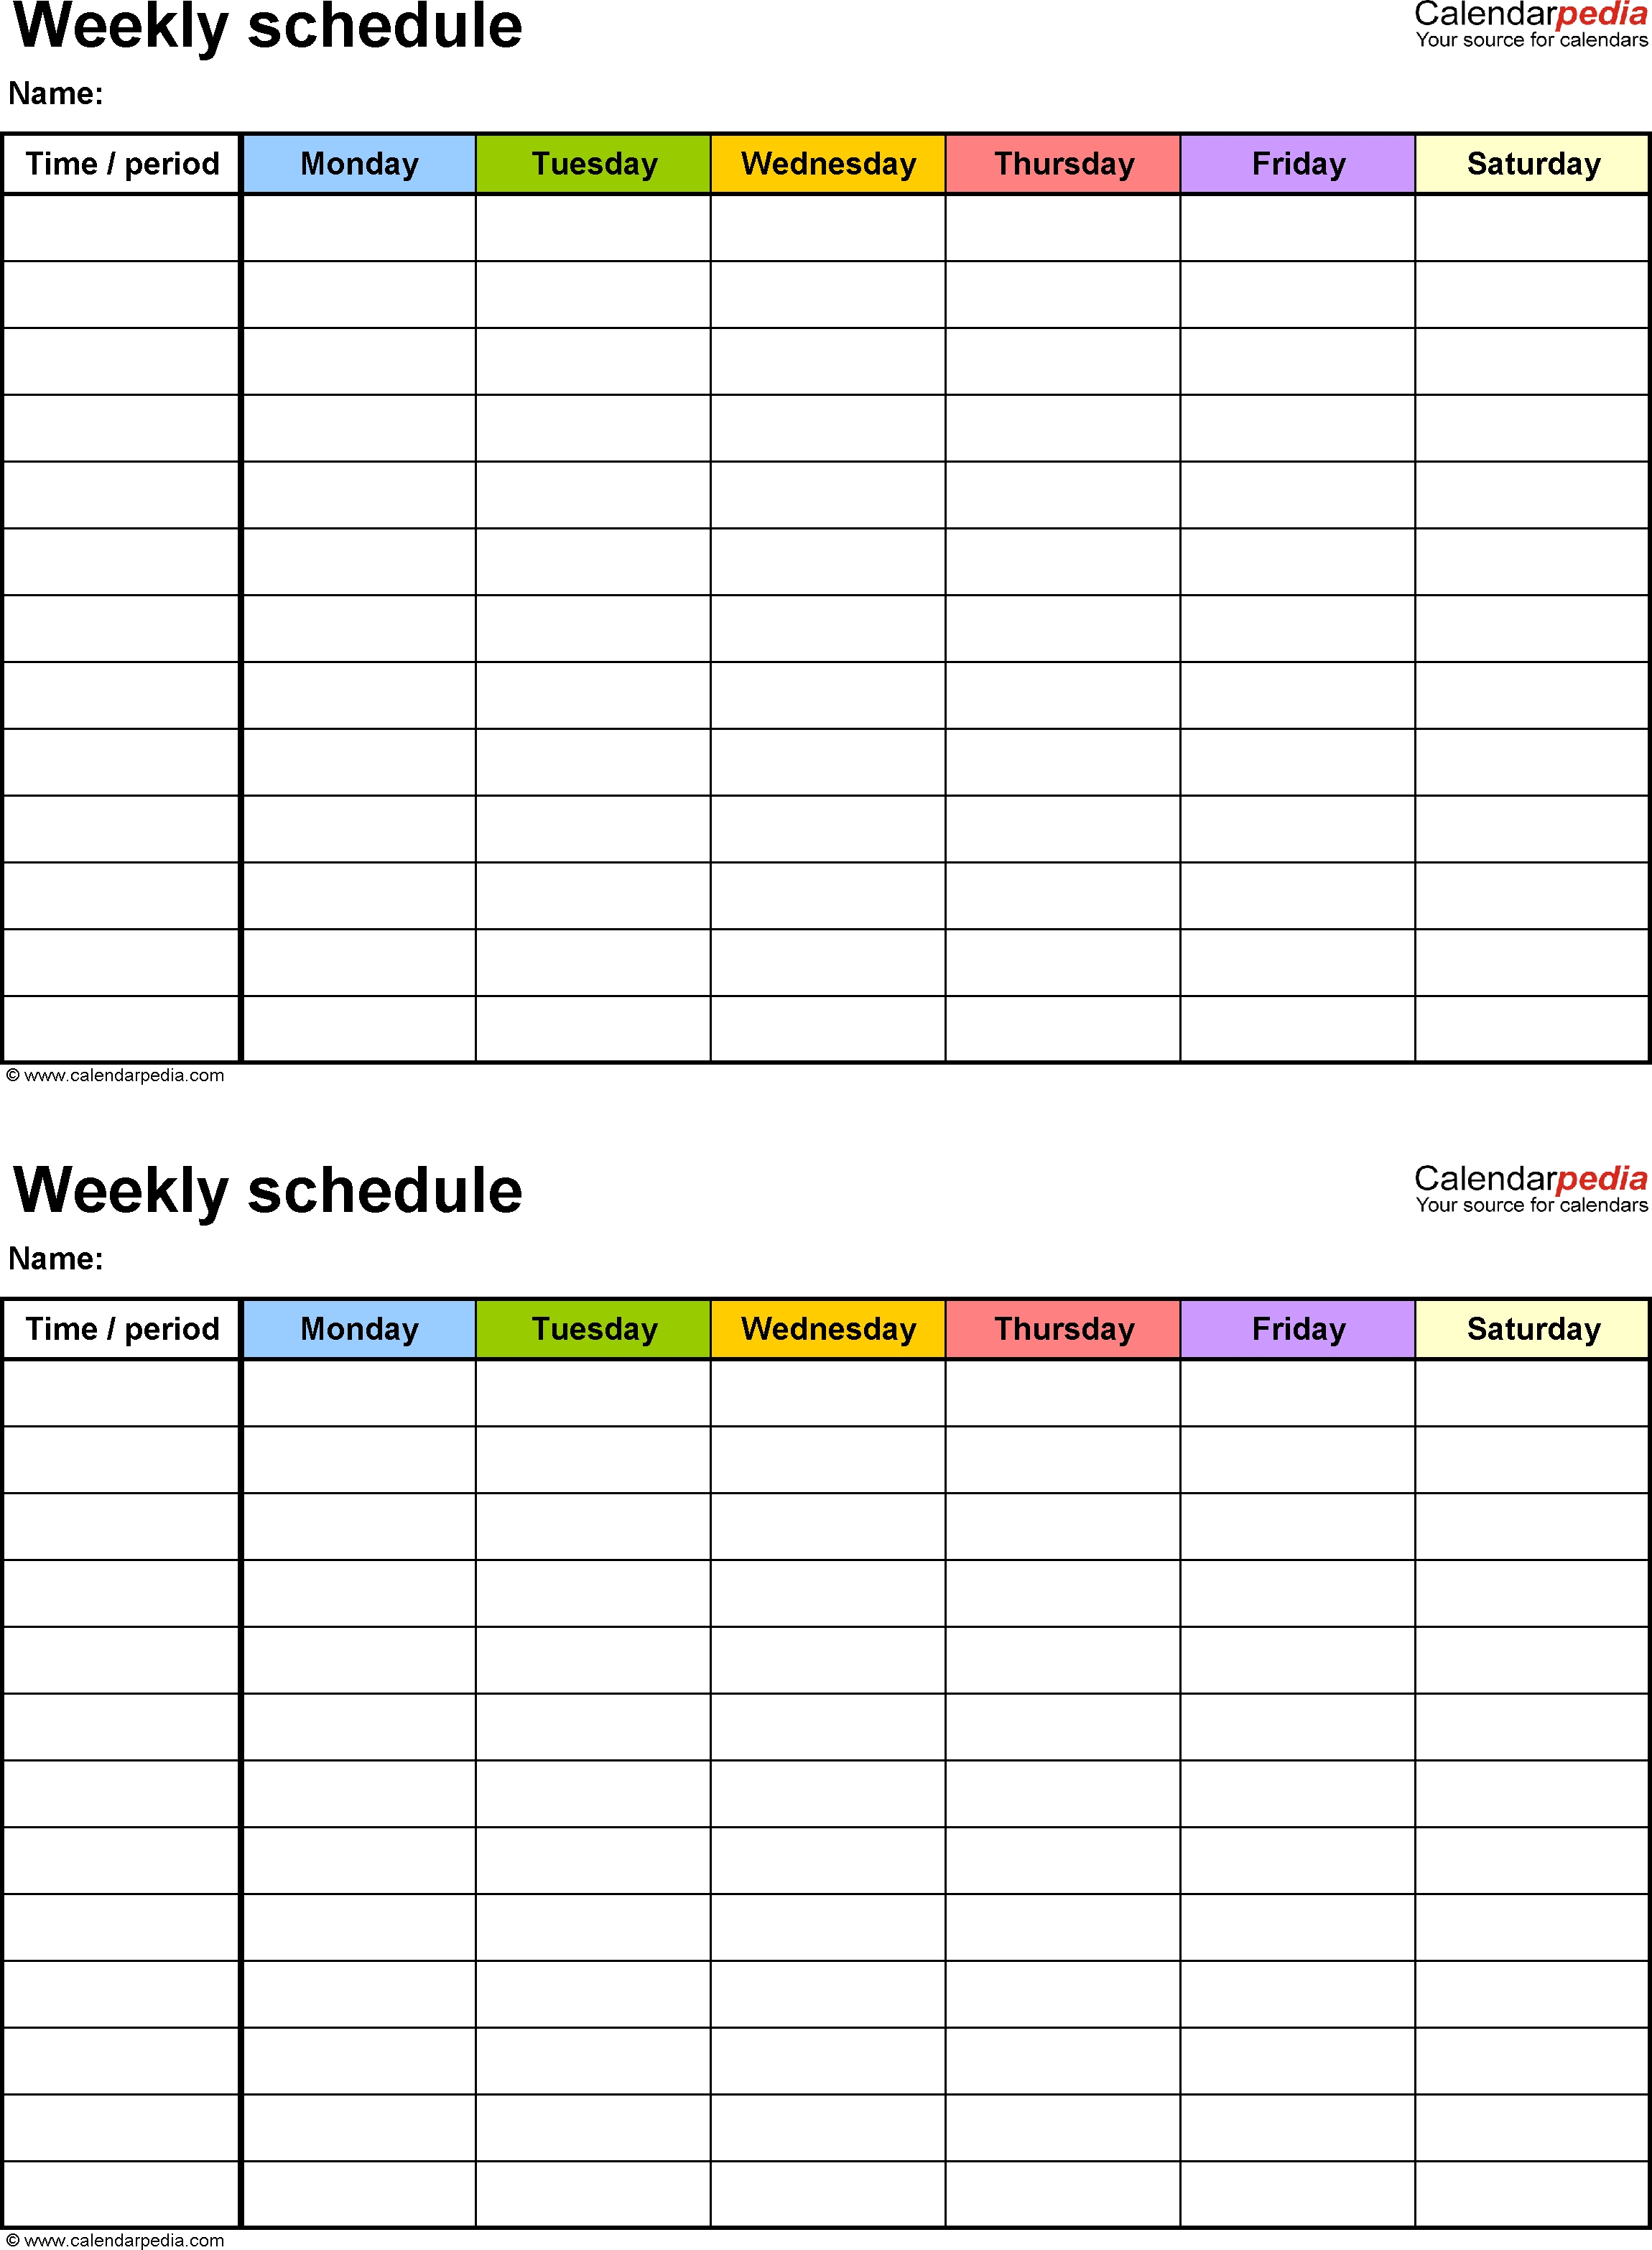 Free Weekly Schedule Templates For Excel - 18 Templates A Week Calendar Template